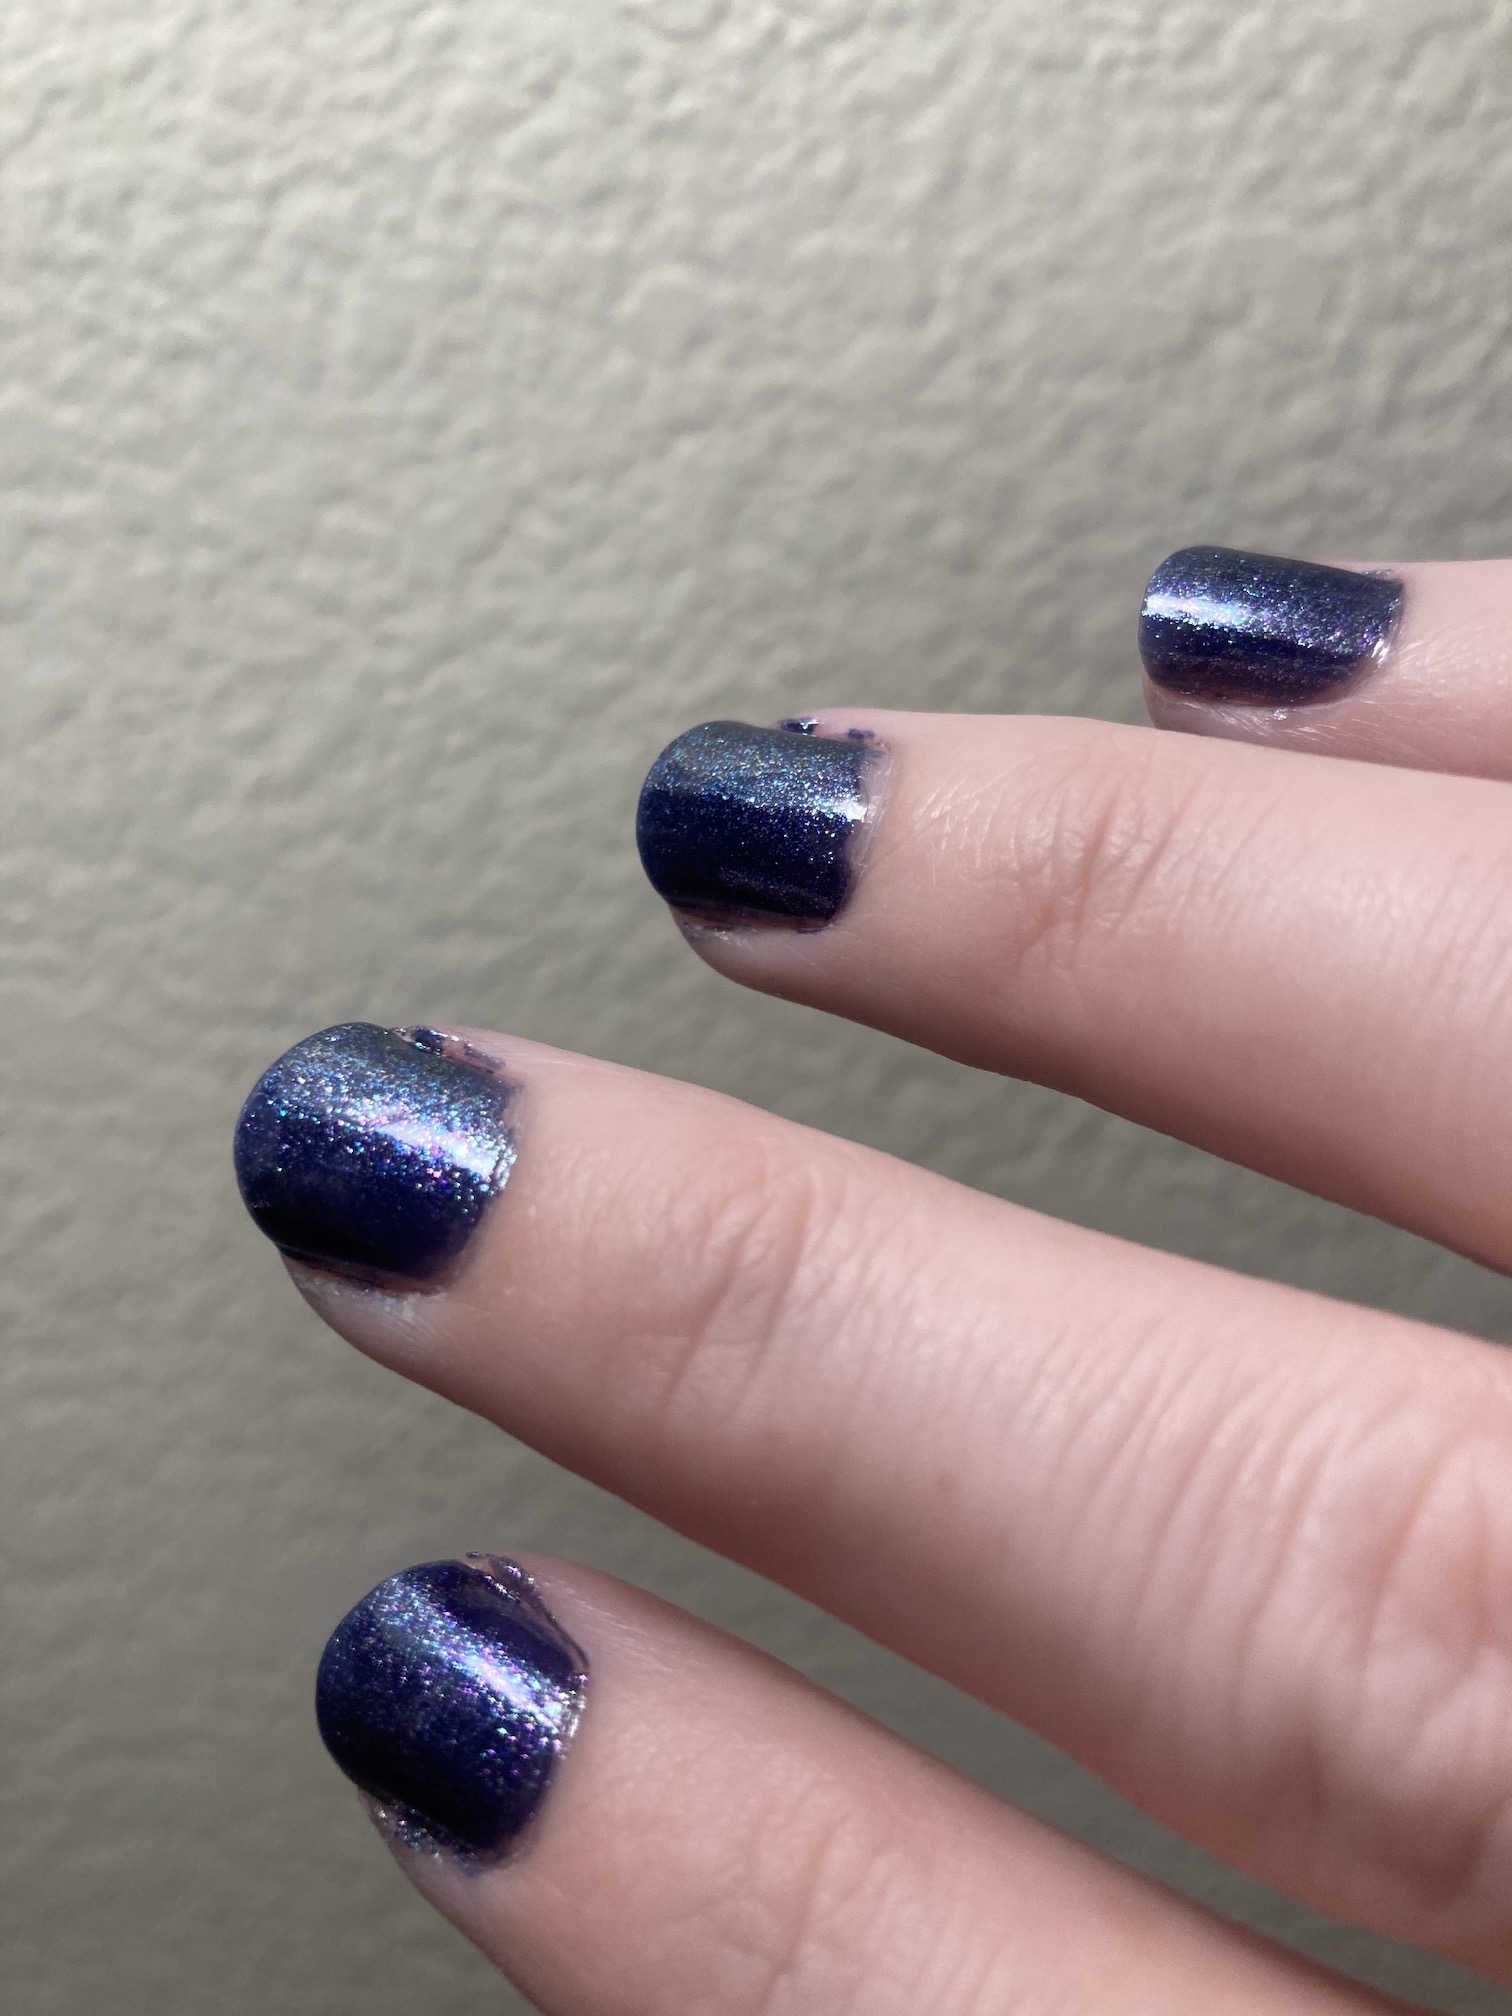 Essie #1657 “Broom with a View”, a dark blue polish with fine green, pink, and purple glitter.